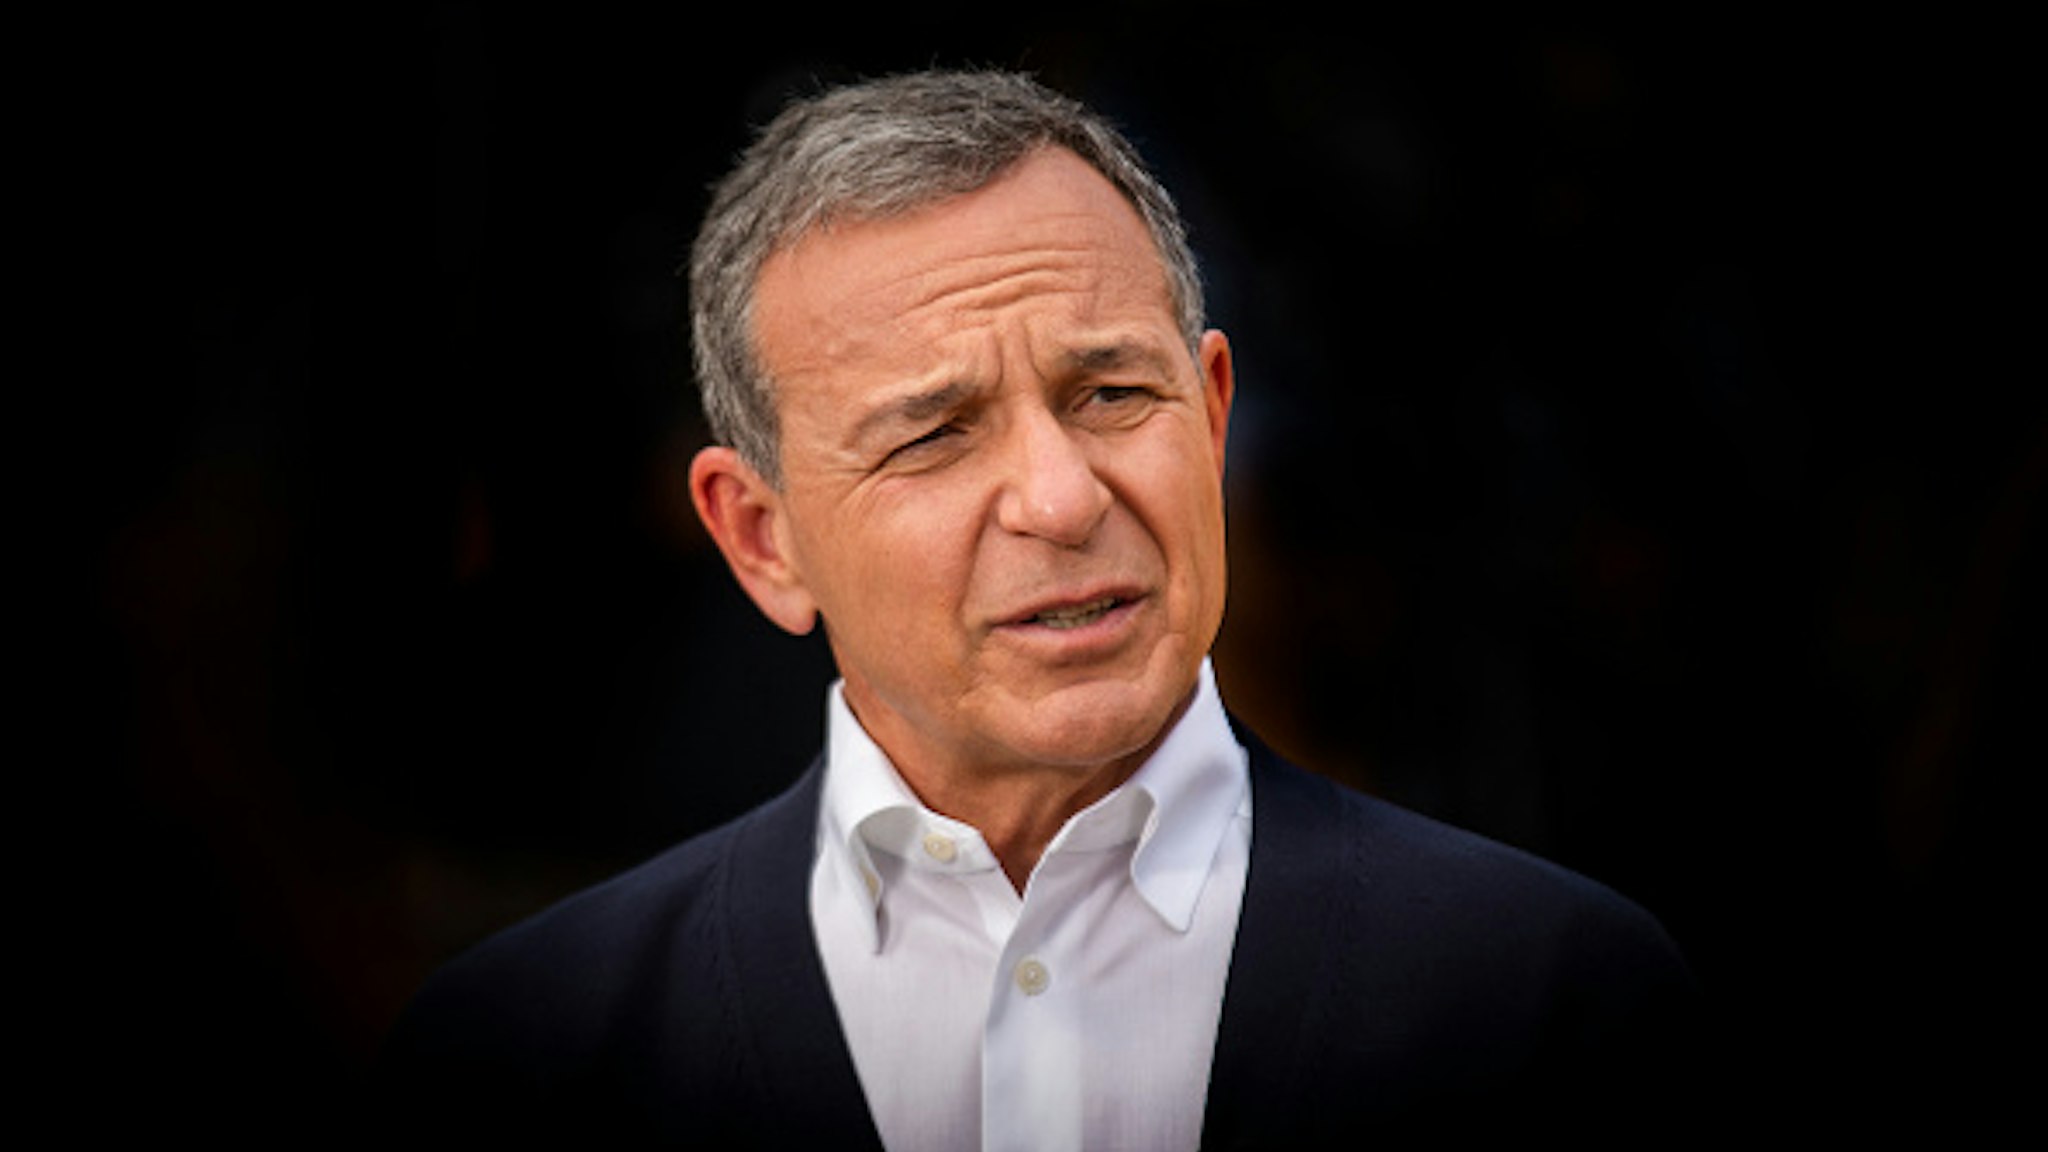 ANAHEIM, CA - MAY 29: Bob Iger, CEO of The Walt Disney Company, is interviewed by the media during the Star Wars: Galaxy's Edge Media Preview event at the Disneyland Resort in Anaheim, Calif., on May 29, 2019.